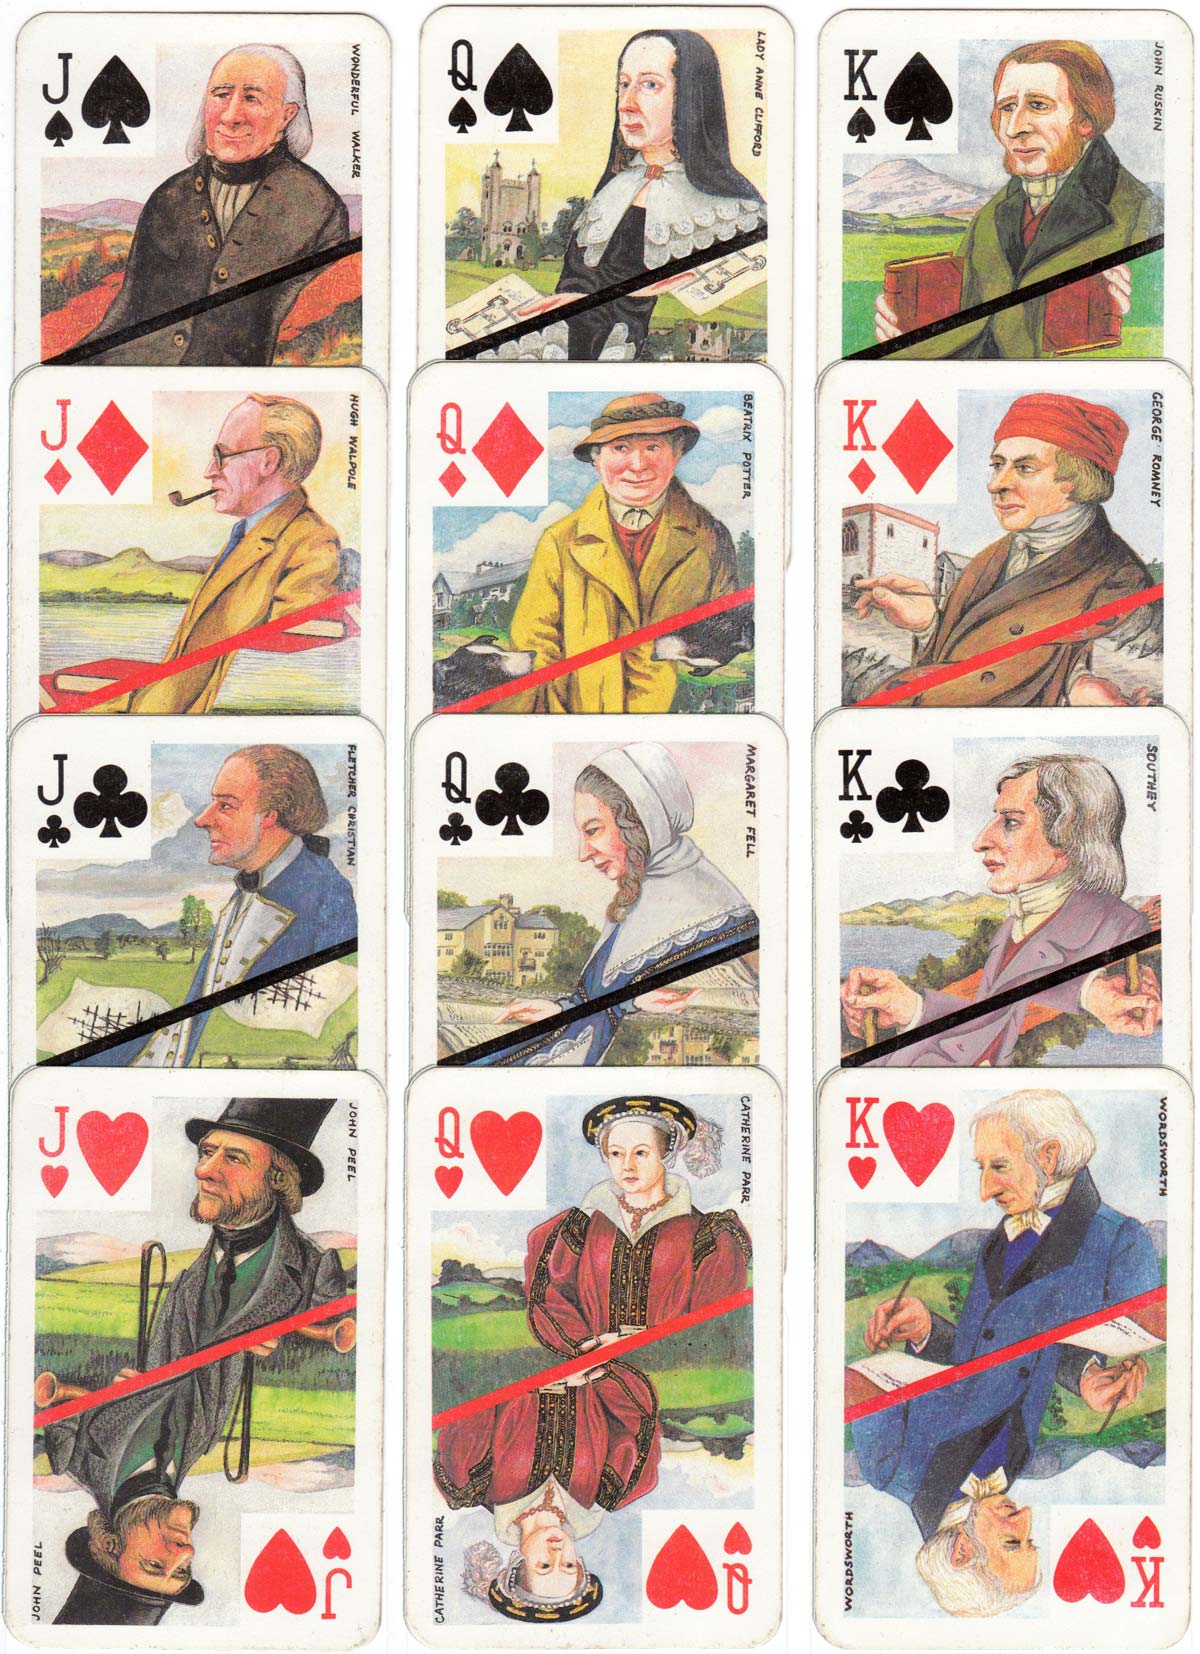 Lakeland playing cards designed by Stuart Lawrence depicting famous characters & views of England’s Lake District, c.1988